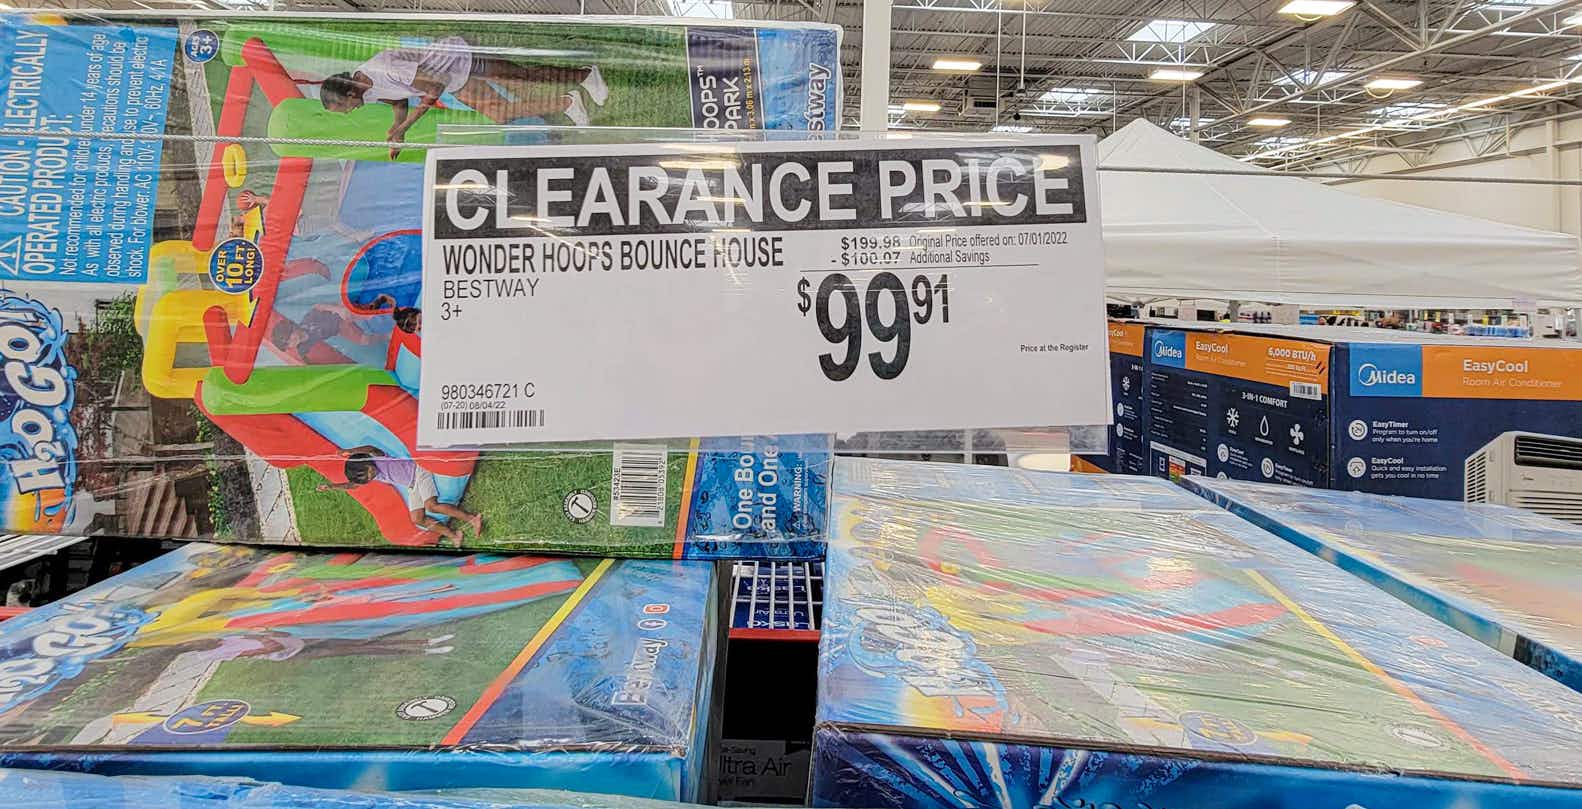 clearance sign for wonder hoops bounce house for $99.91